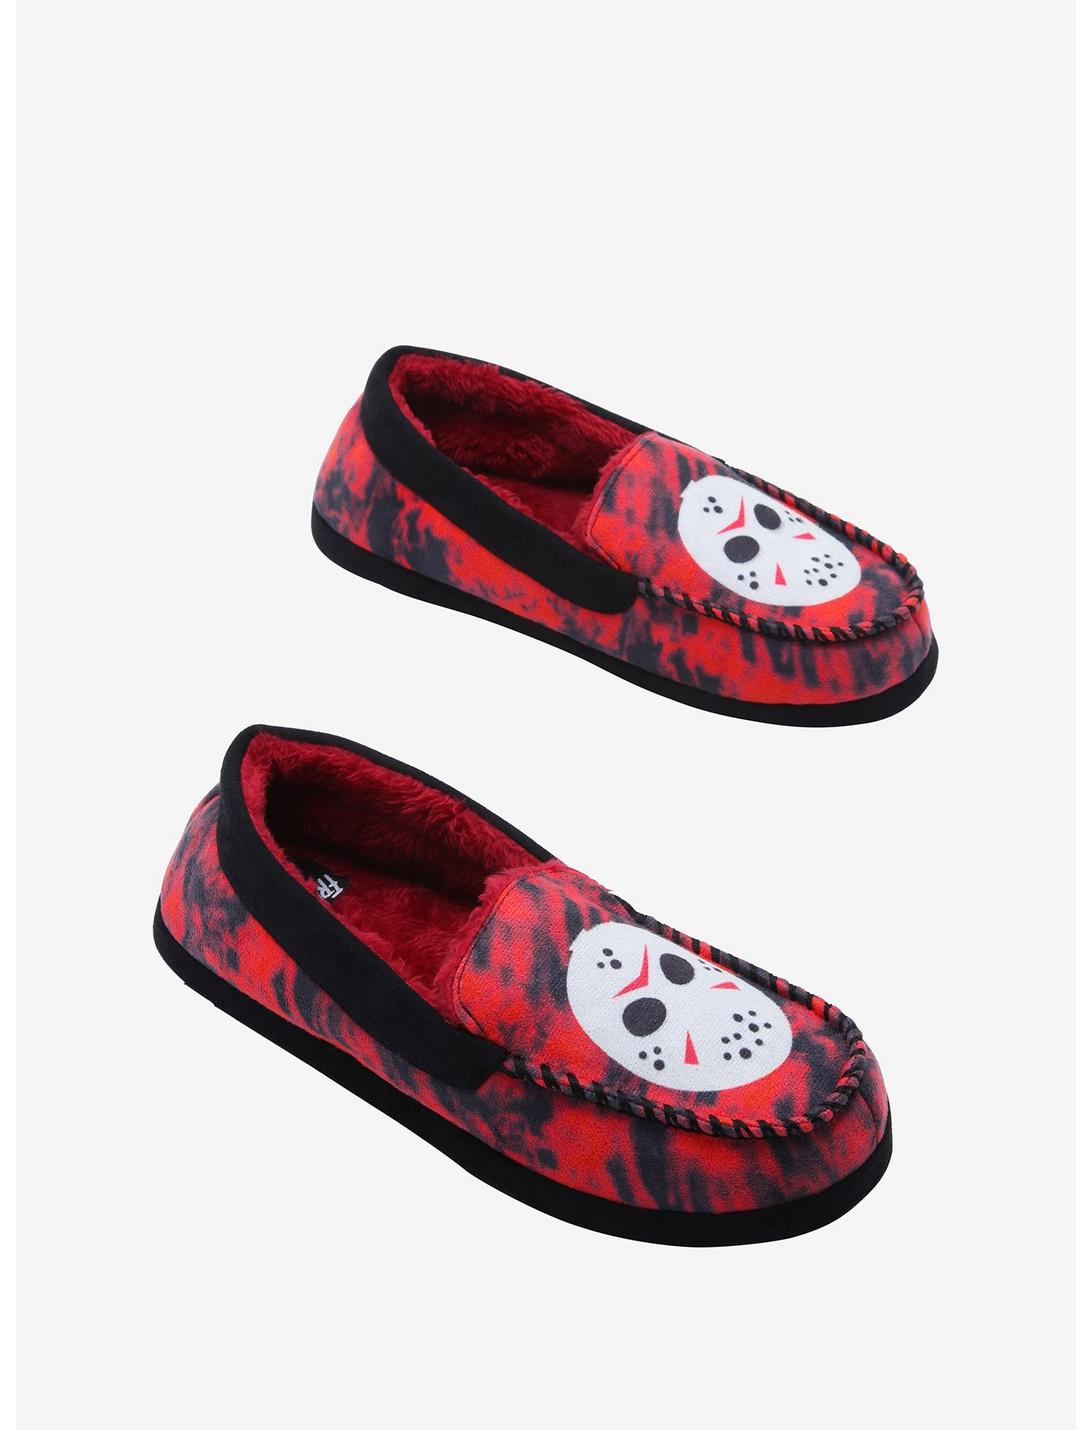 Friday The 13th Jason Red Tie-Dye Slippers, MULTI, hi-res